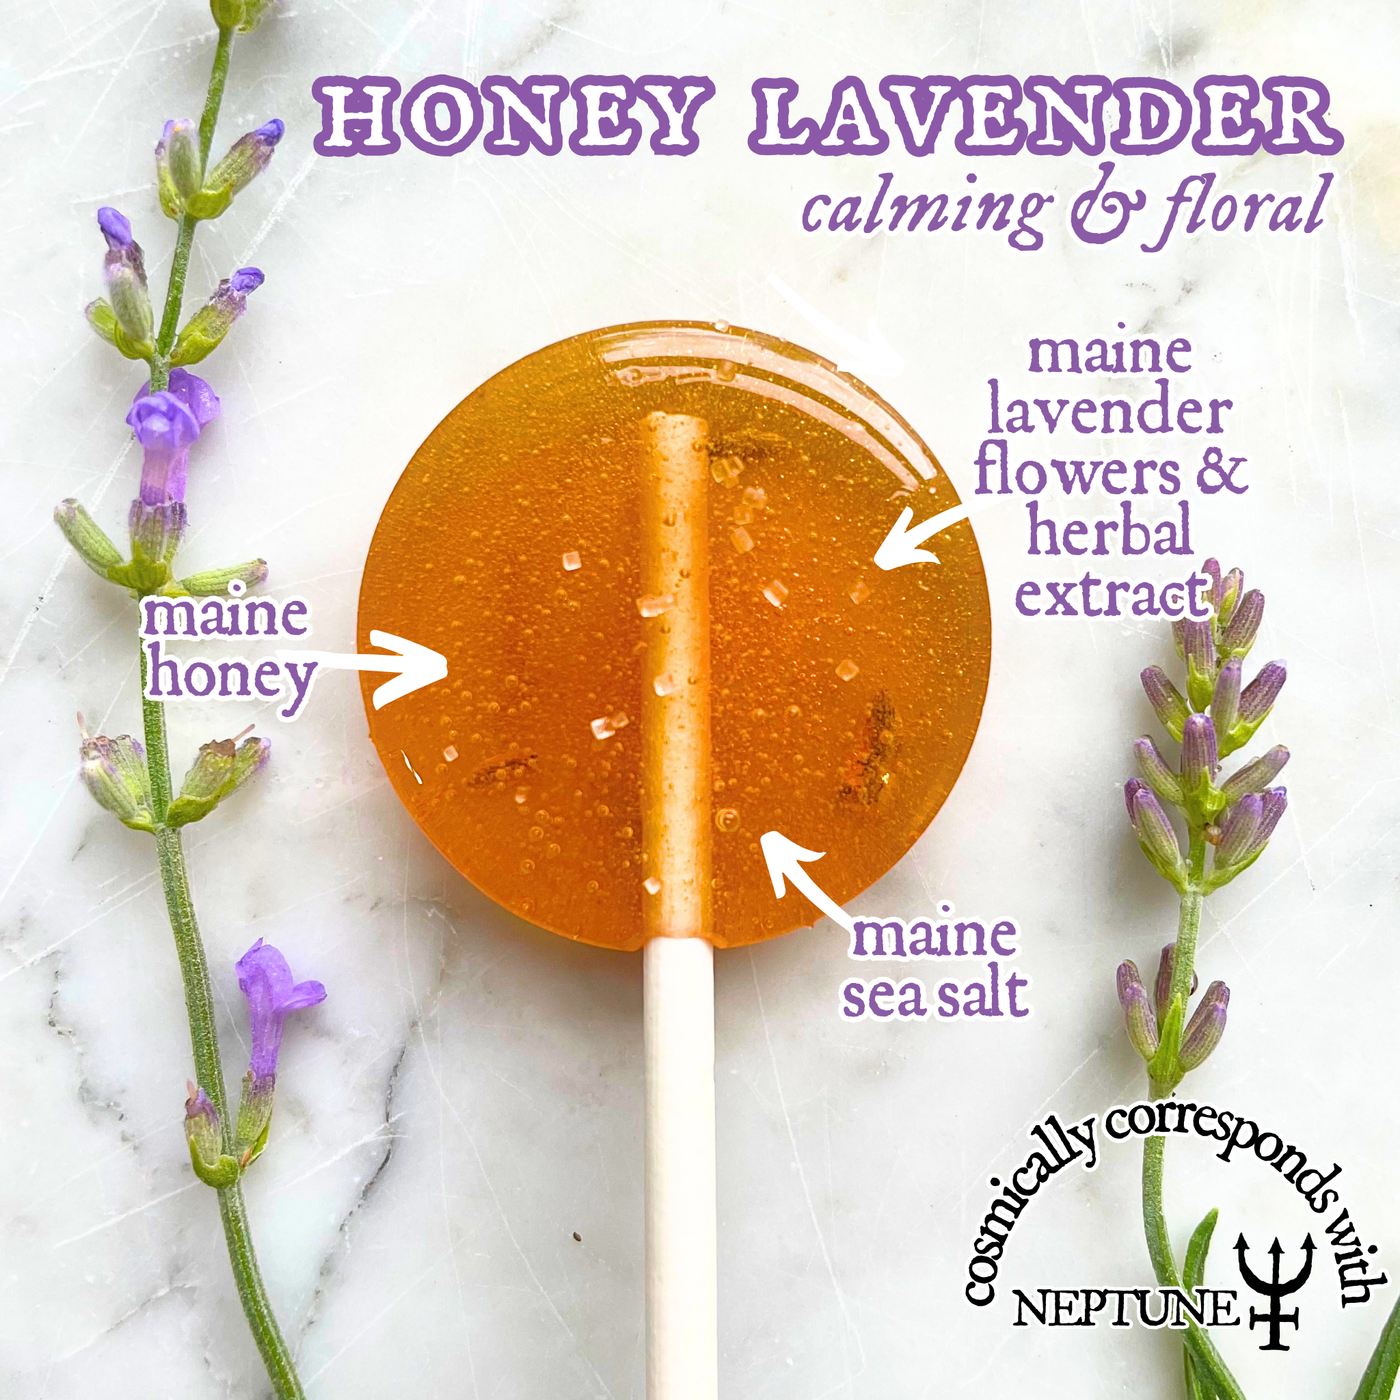 Plants & Planets Lollipops - Cosmic Candy Apothecary: Honey Lavender